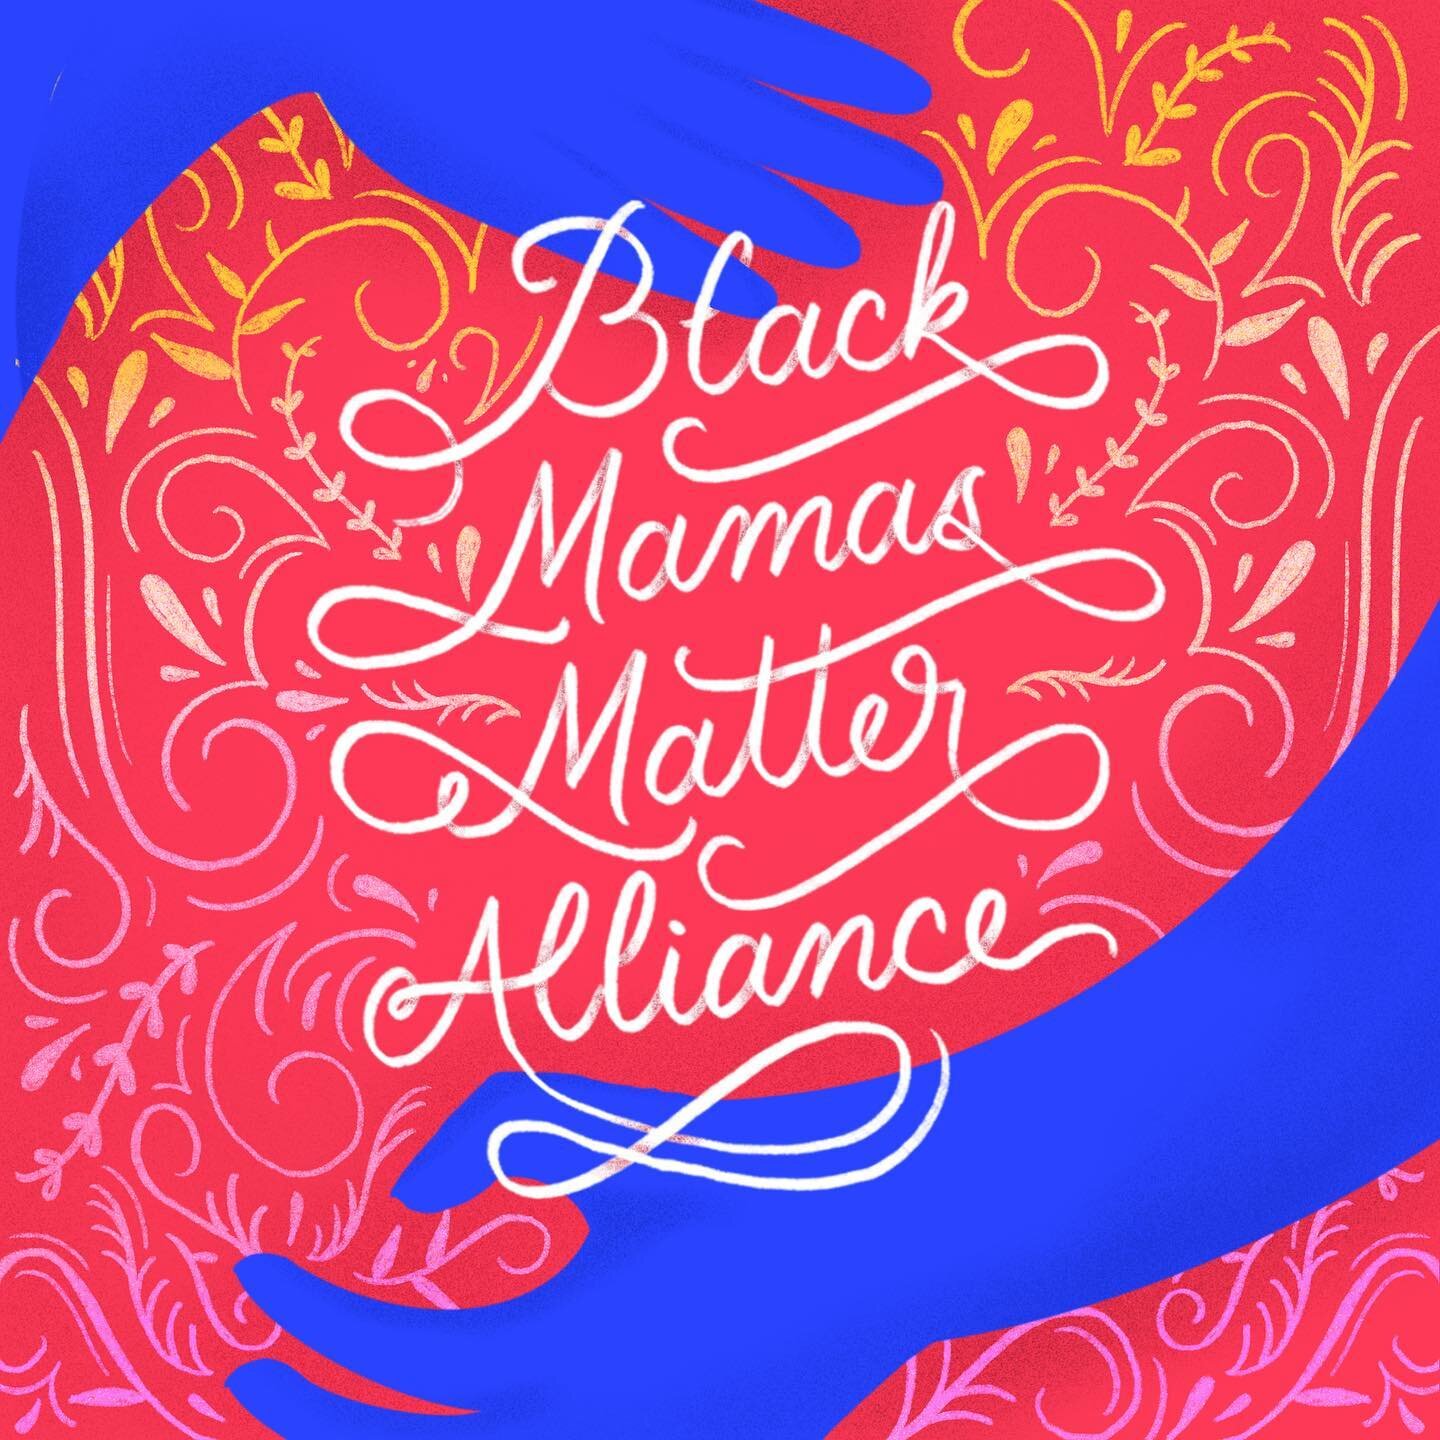 I want to take some time each day to promote a different organization that helps black communities. Today I&rsquo;m focusing on Black Mamas Matter Alliance (@blackmamasmatter). They envision a world where Black mothers have the rights, respect and re